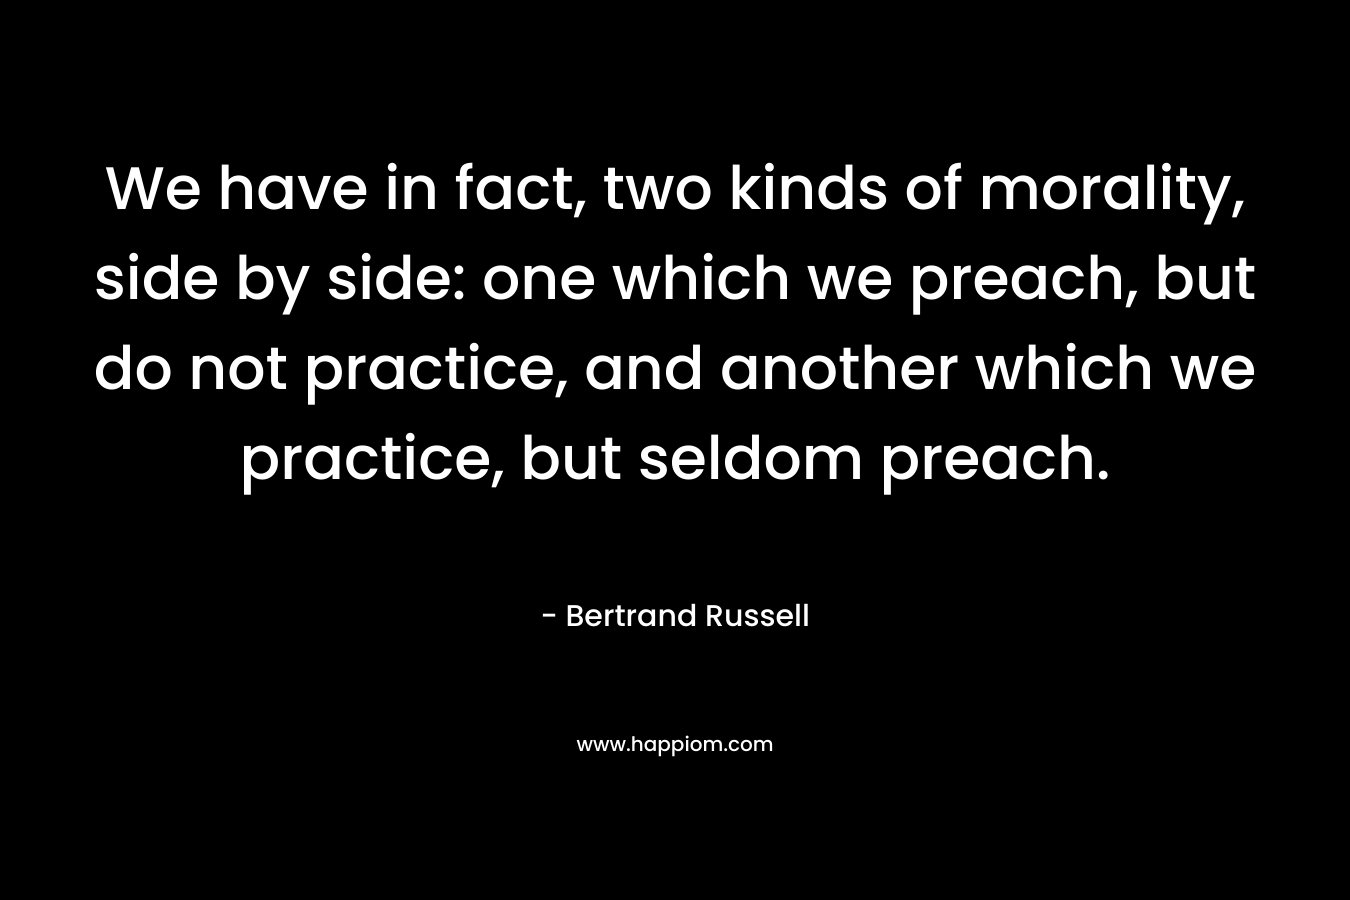 We have in fact, two kinds of morality, side by side: one which we preach, but do not practice, and another which we practice, but seldom preach. – Bertrand Russell